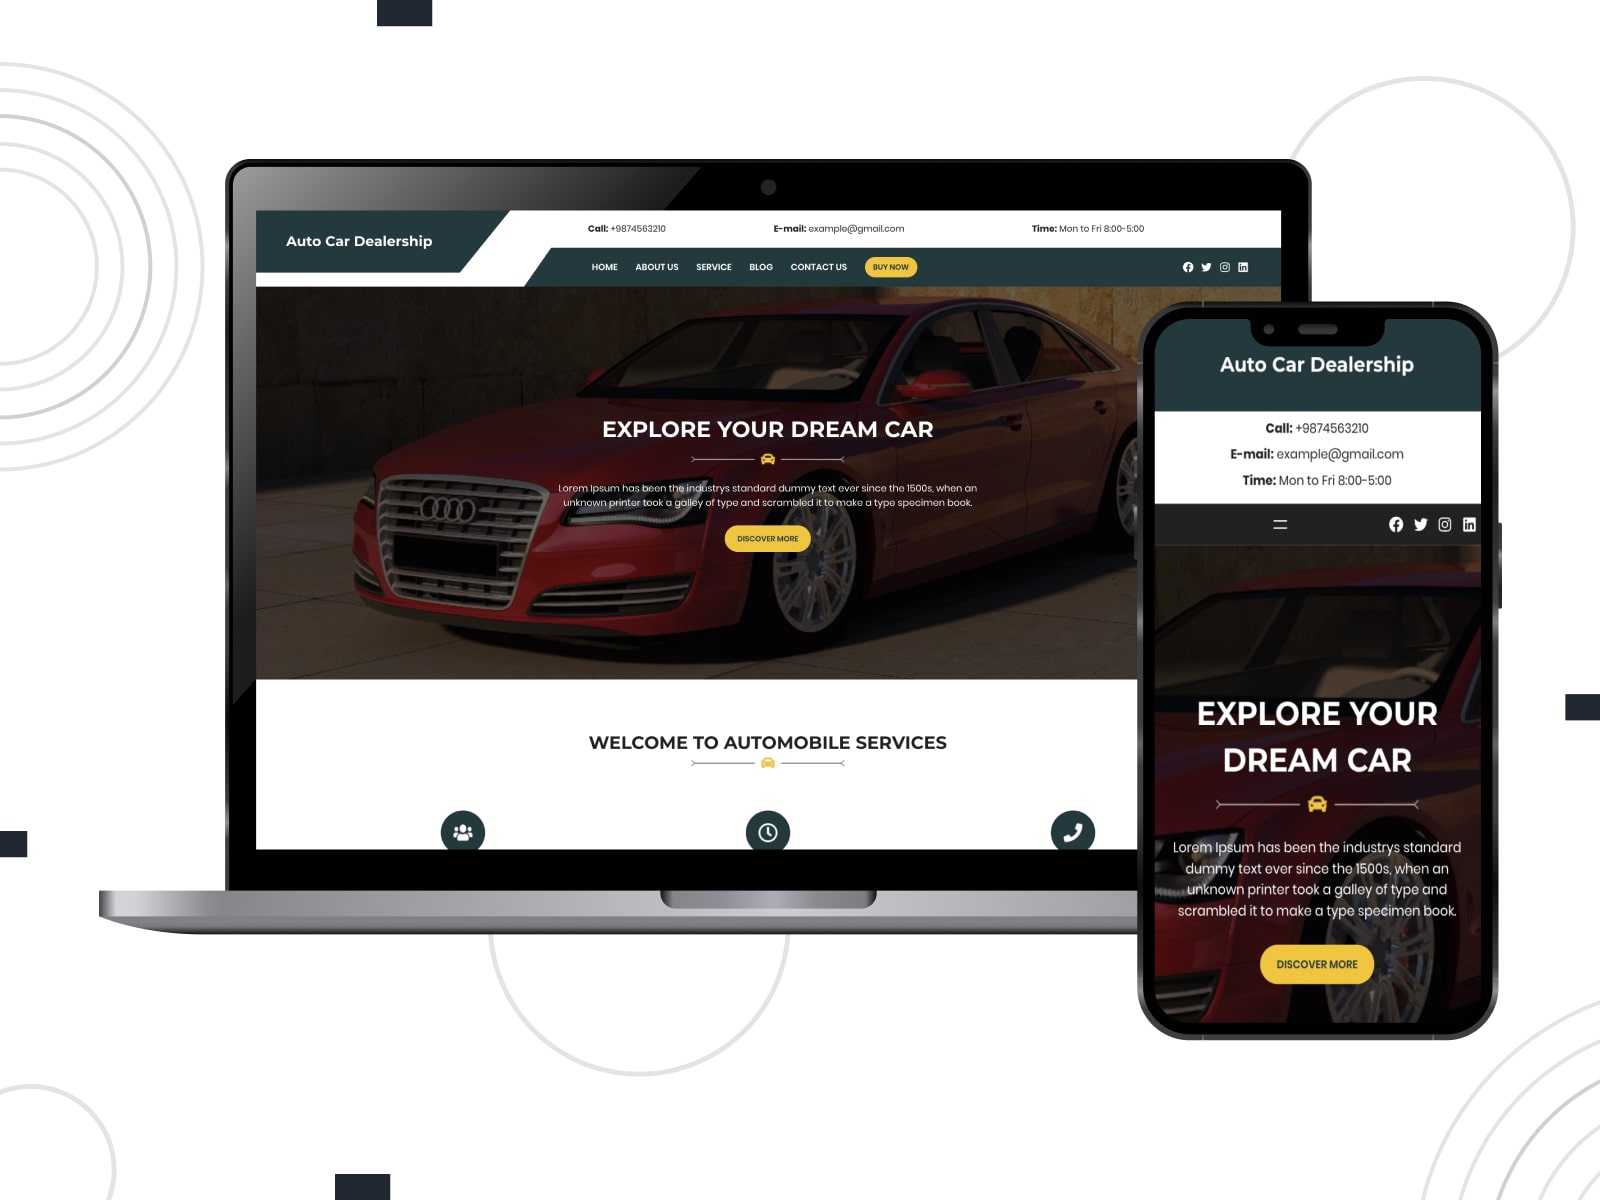 Collage of the Auto Car Dealership free theme for WordPress repair shop sites on mobile and desktop screens.